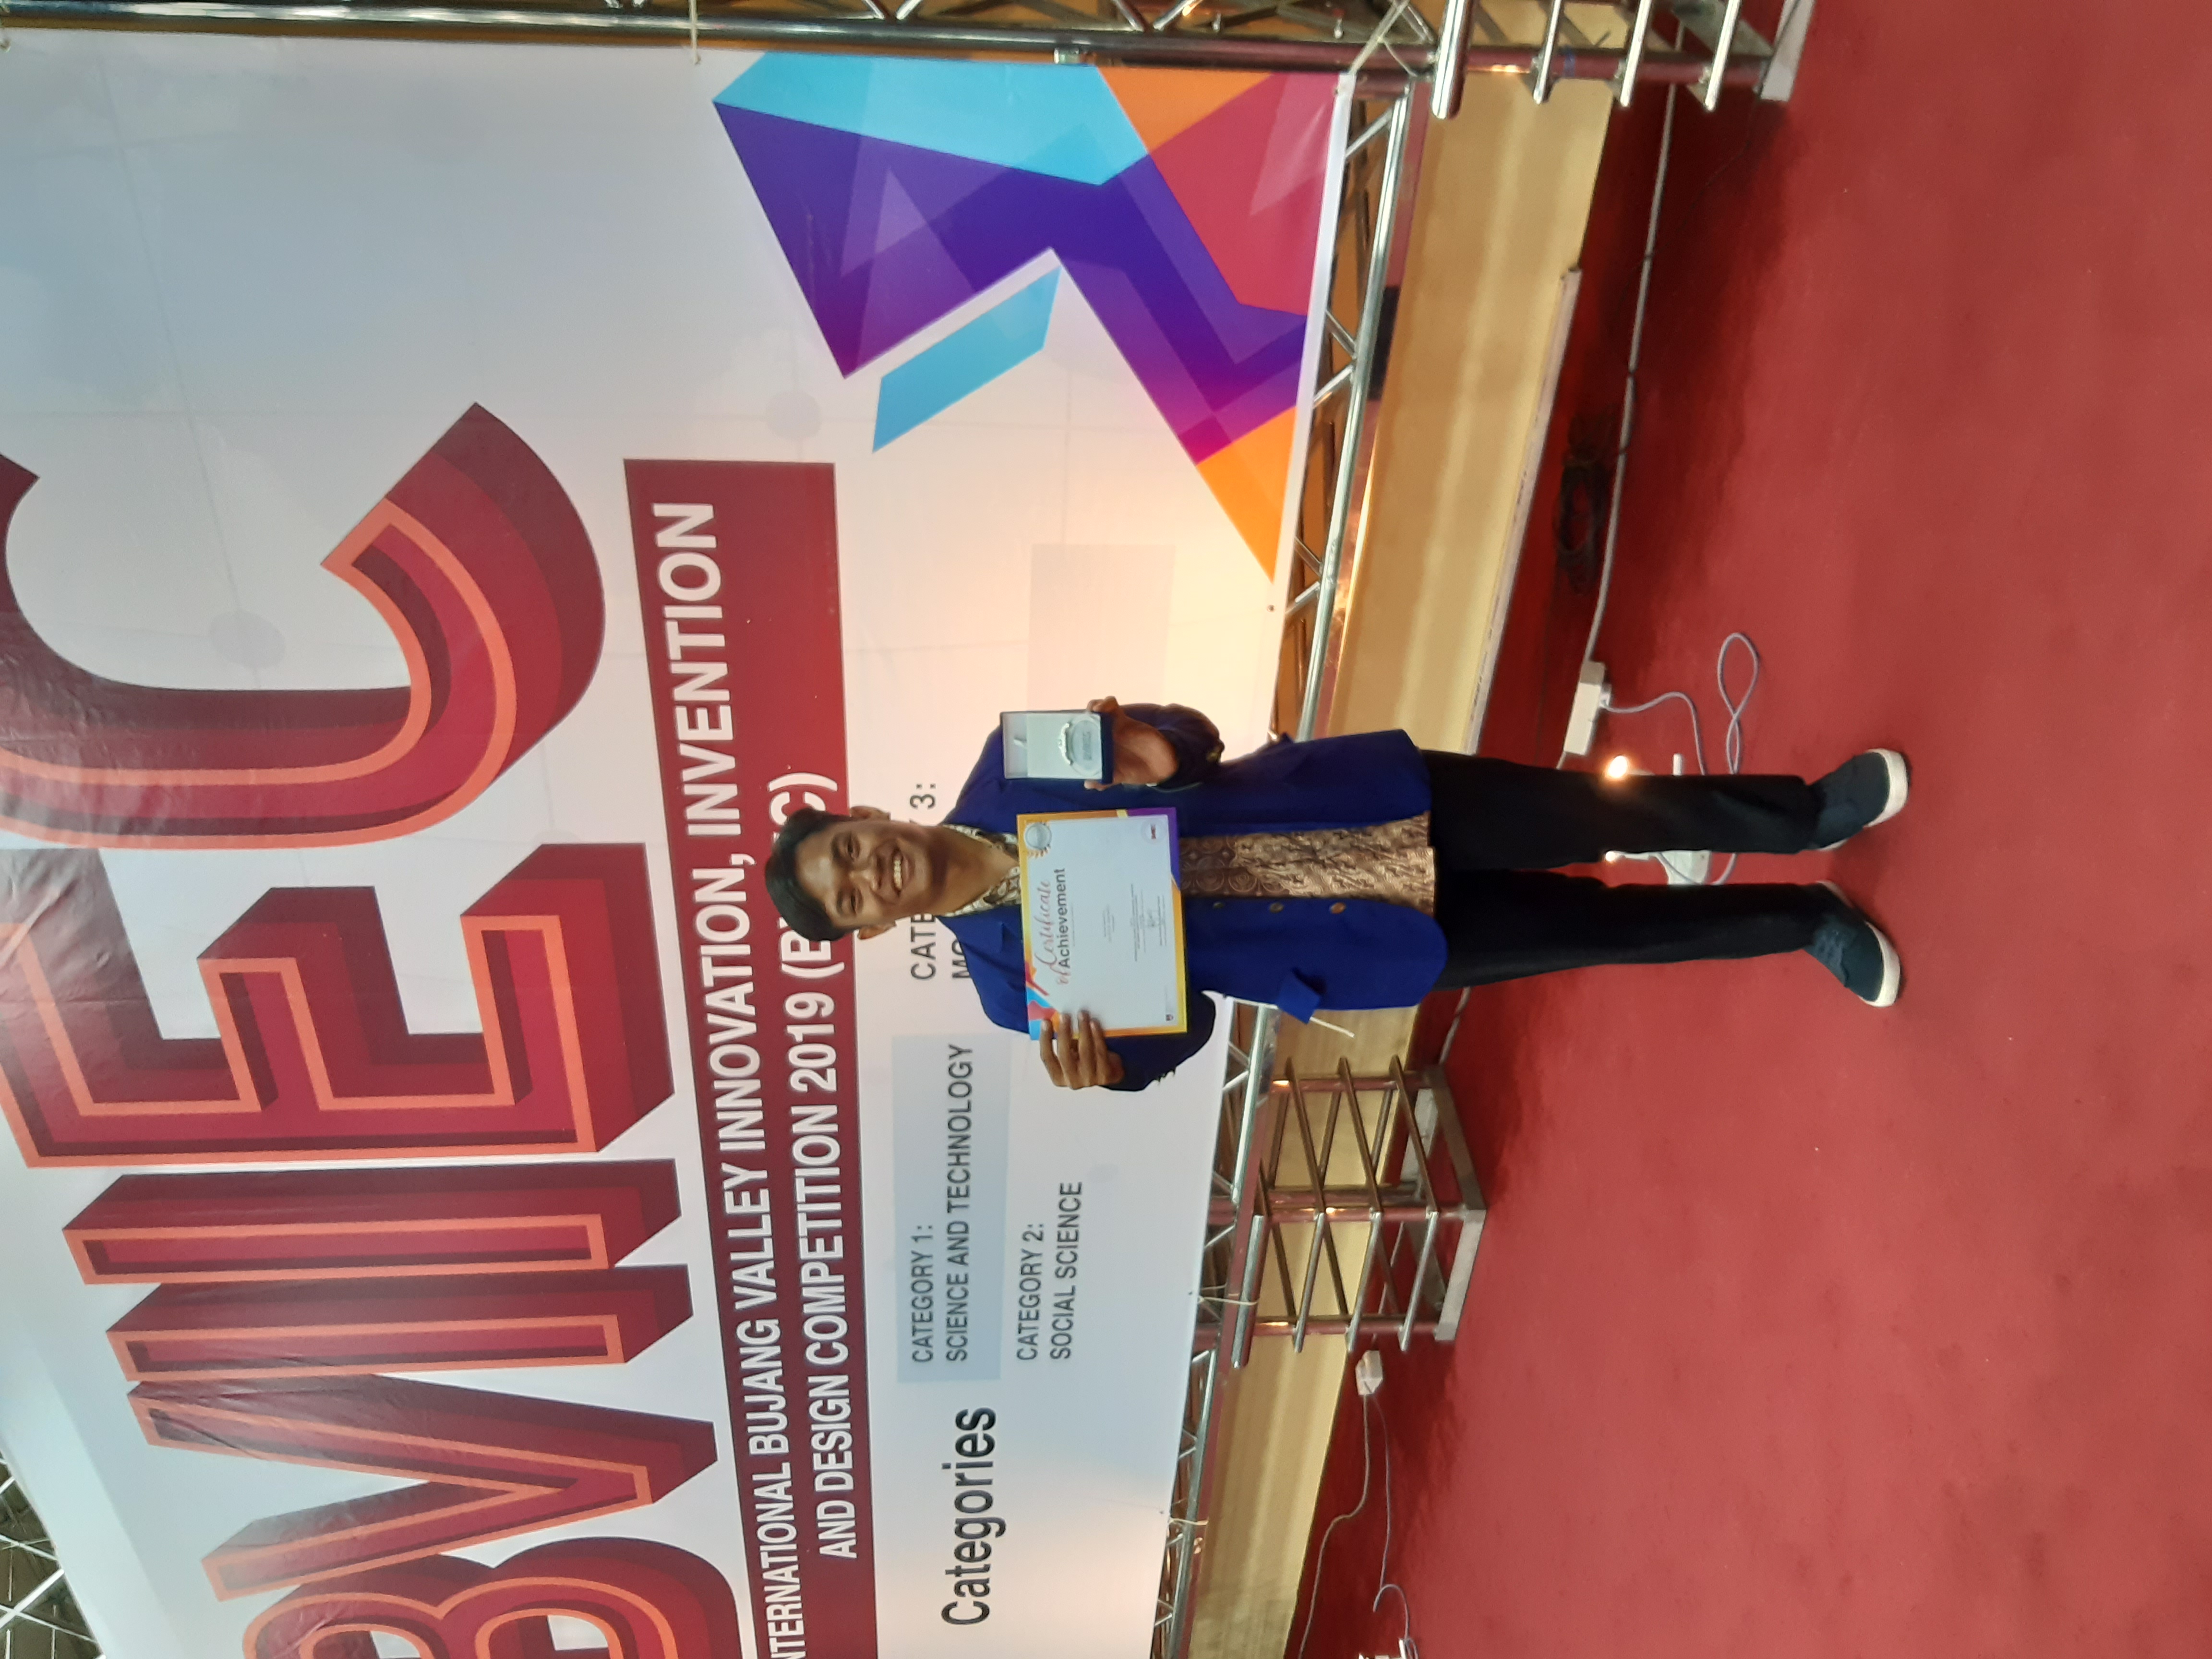 Foto International bujang valley innovation invention and design competition 2019